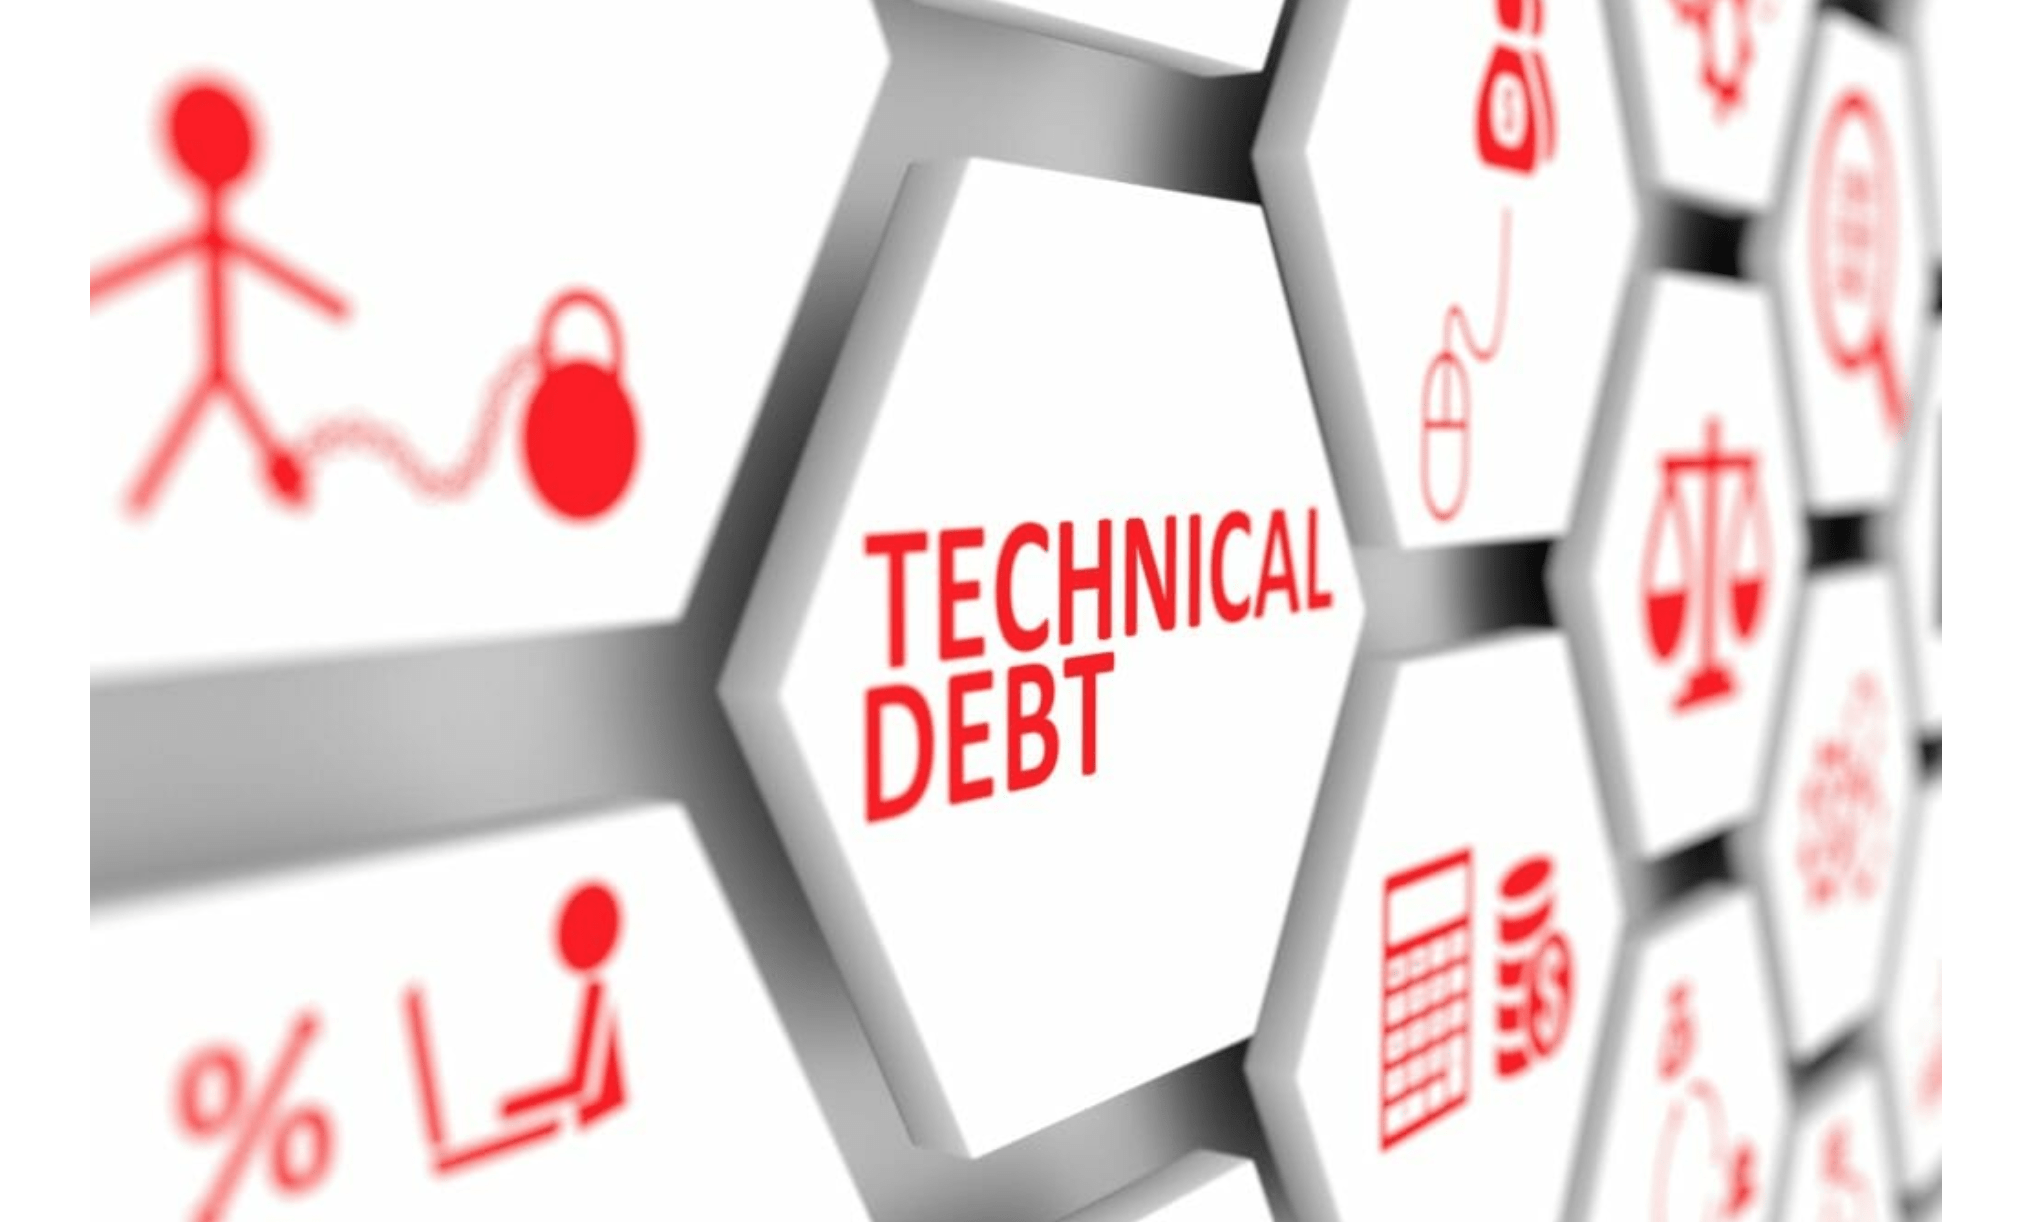 2020 Approach On How to Measure Technical Debt